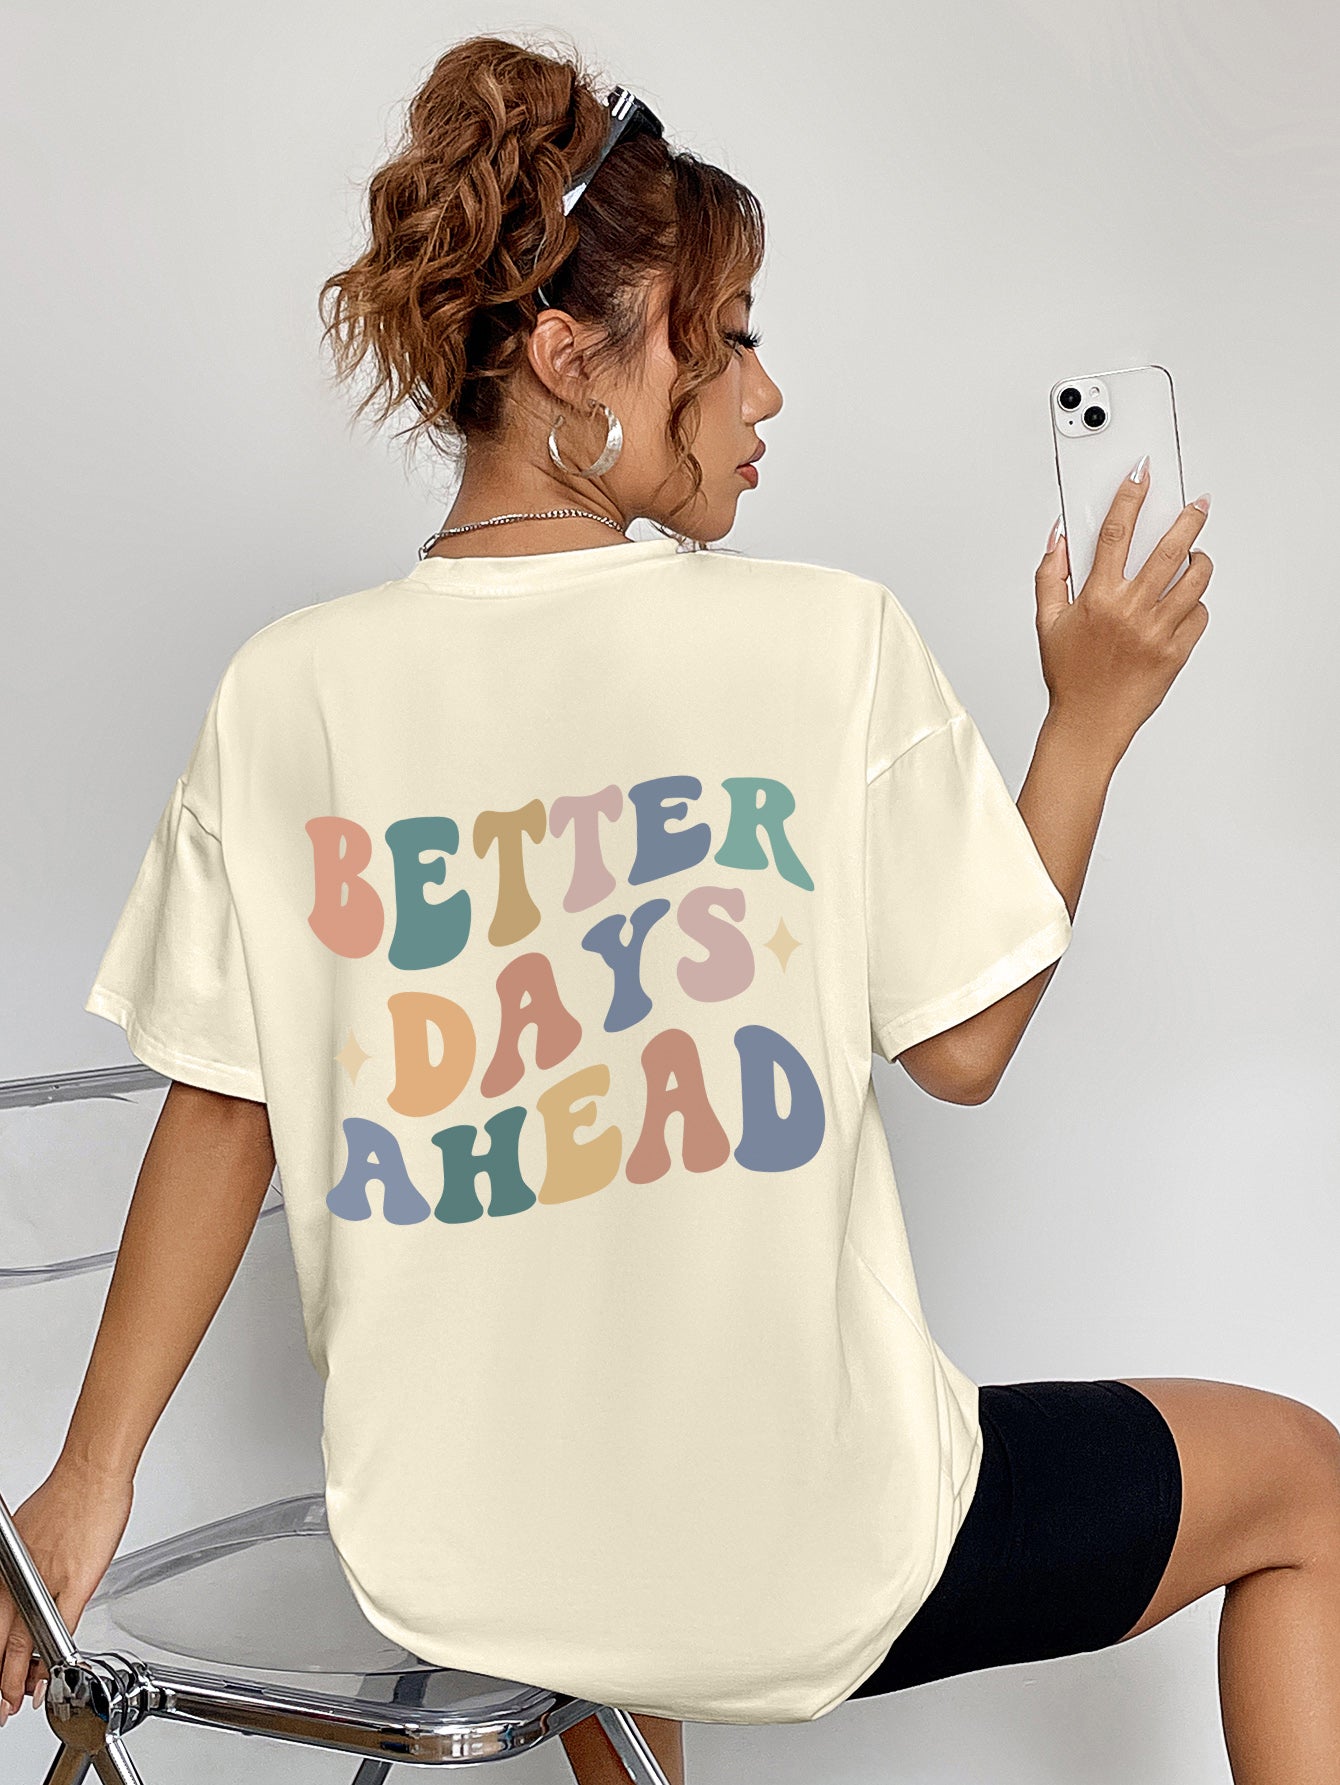 Better Days Ahead Graphic Tee